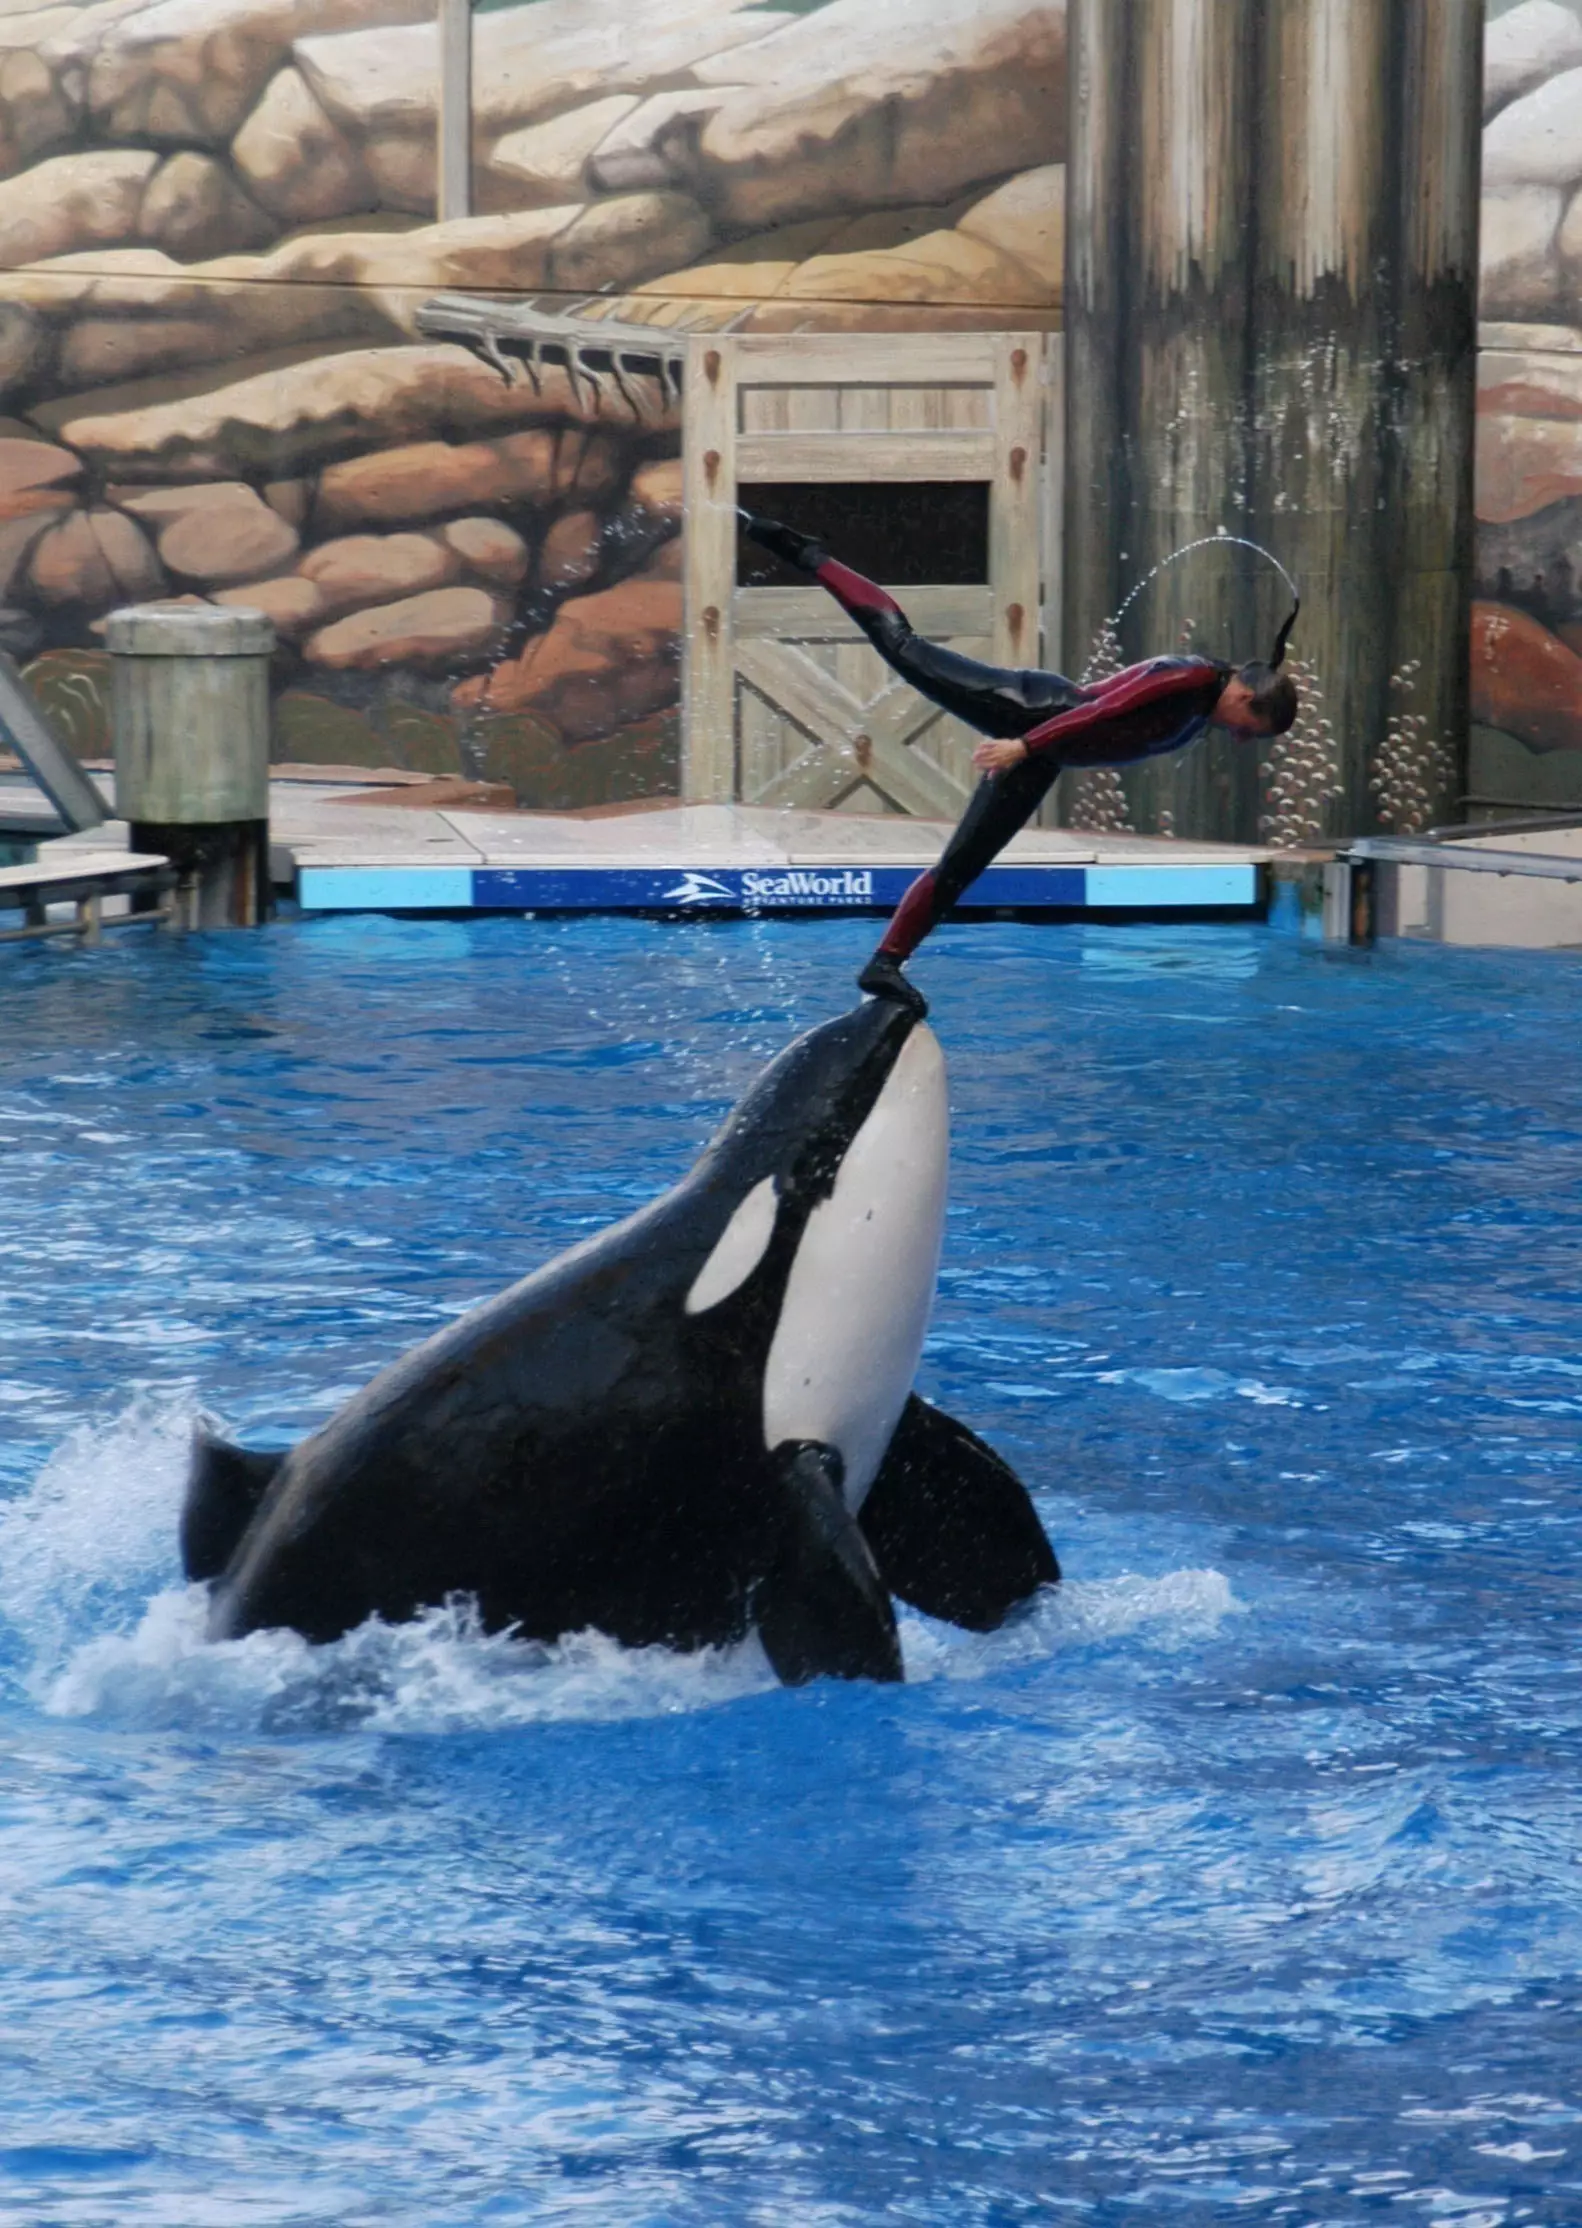 TripAdvisor said they want companies to stop forcing animals to perform tricks.